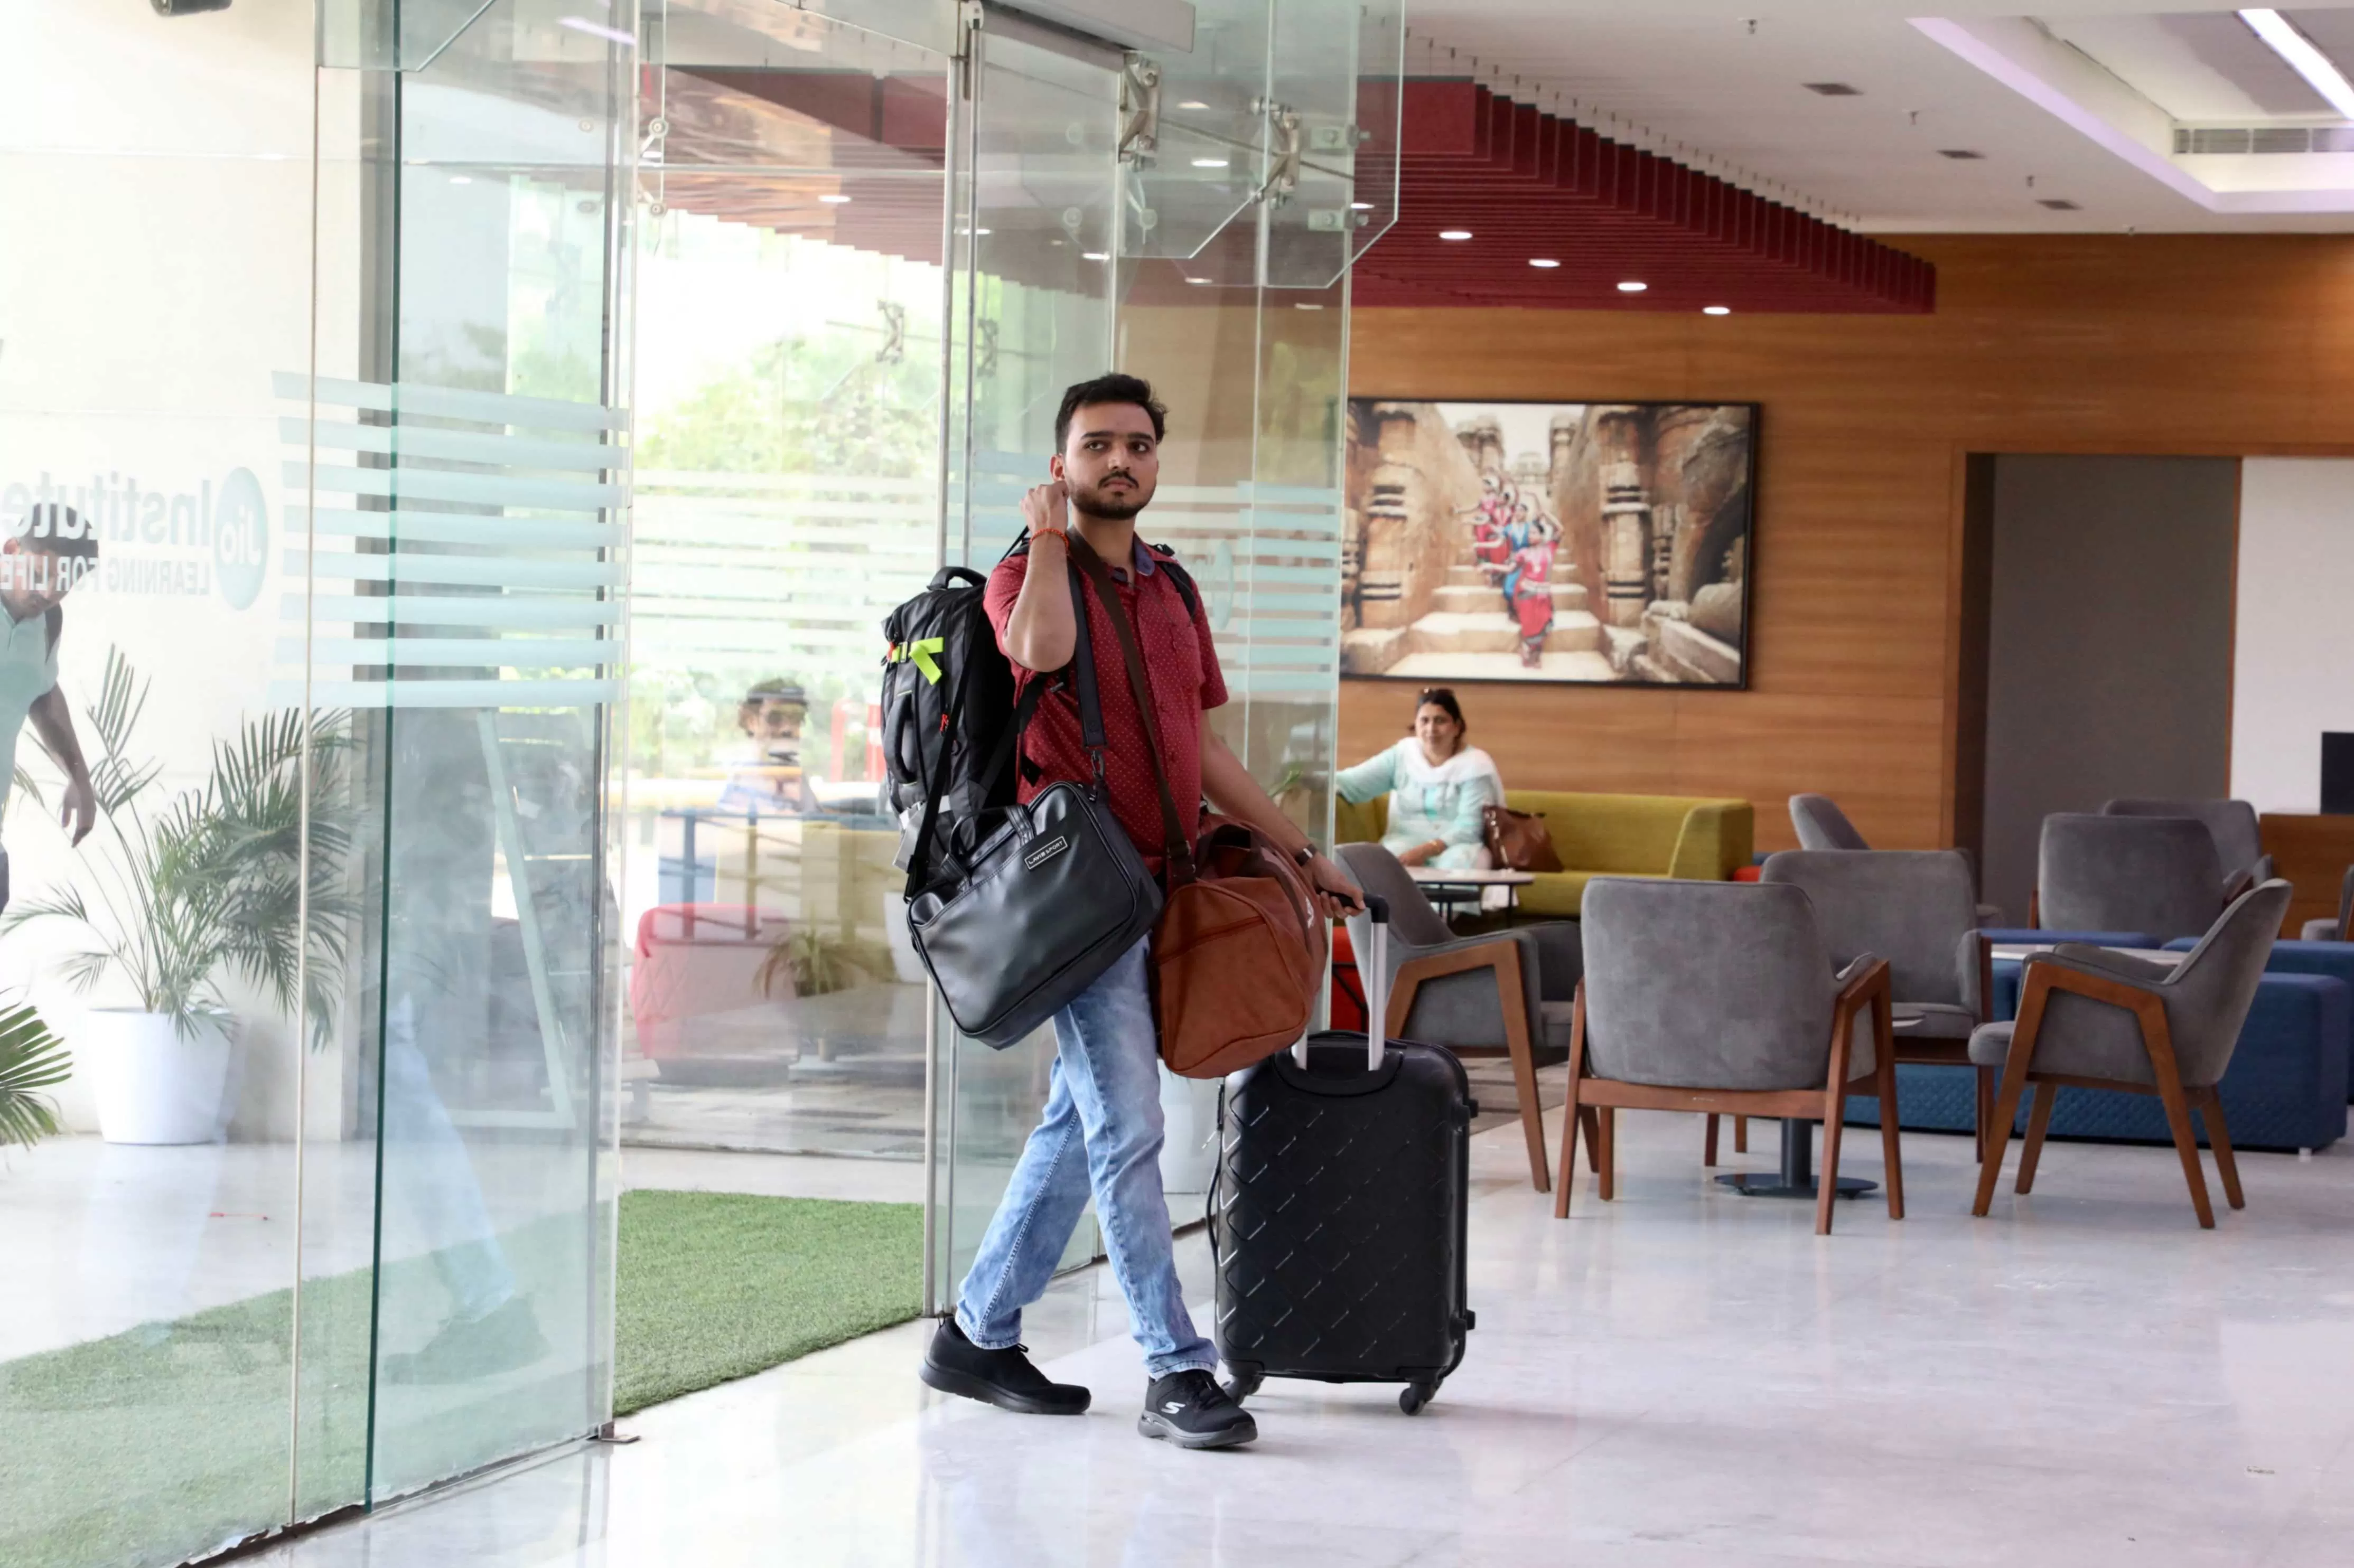 student entering campus with bags